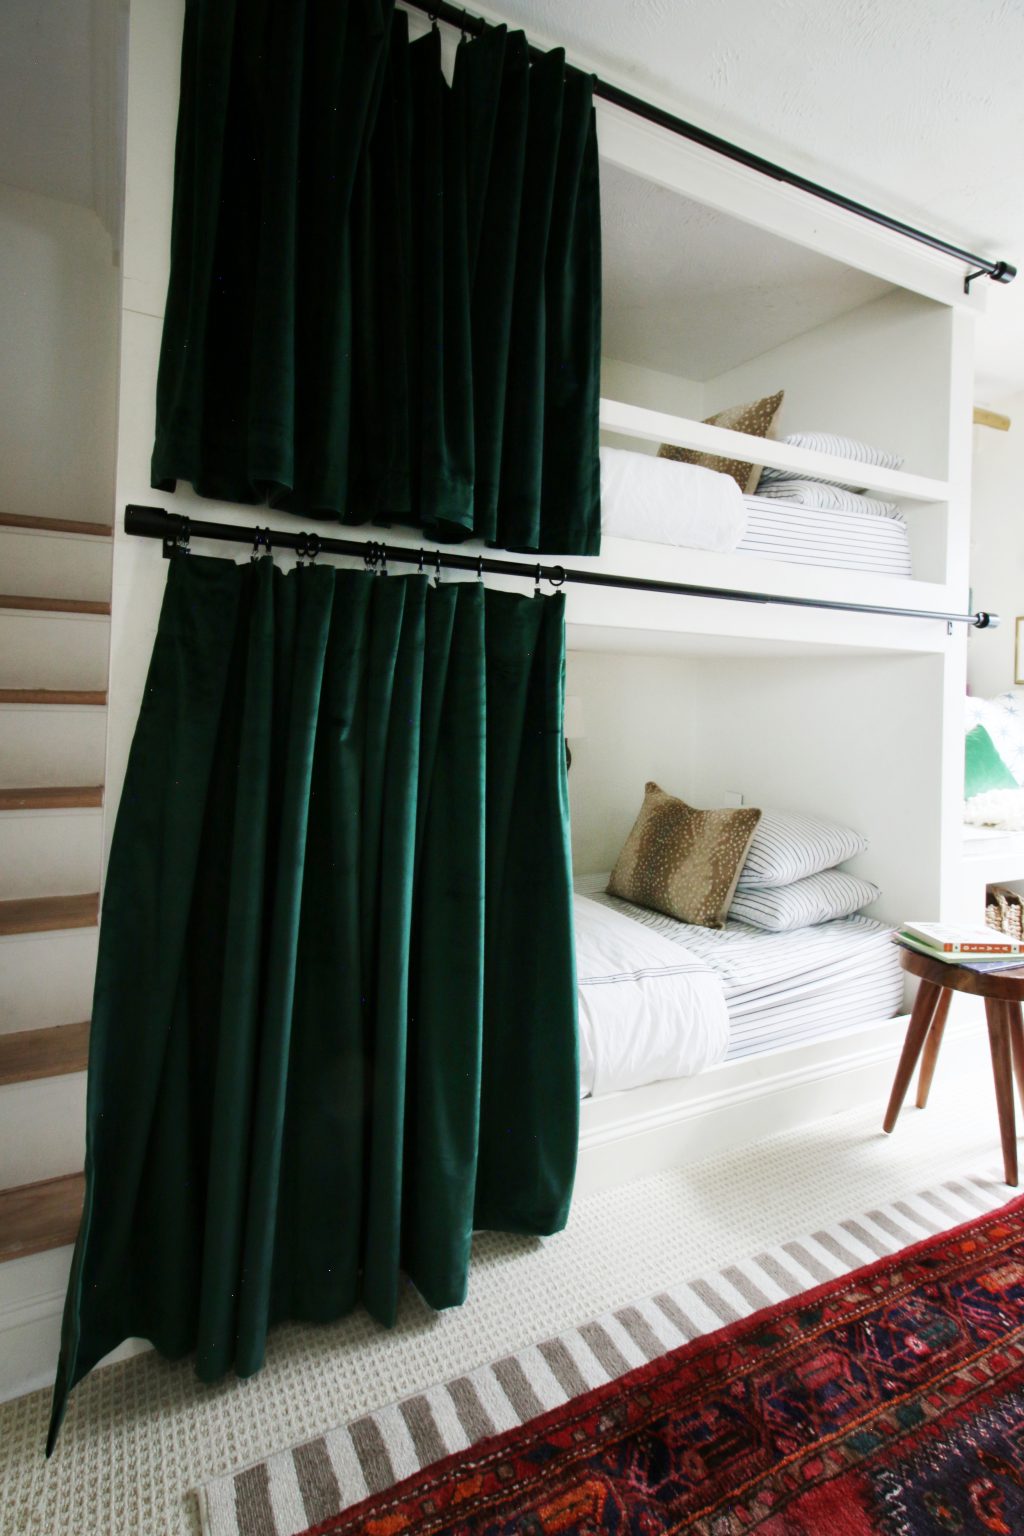 Hanging Curtains On Bunk Beds Chris, Bunk Bed Fort Curtains